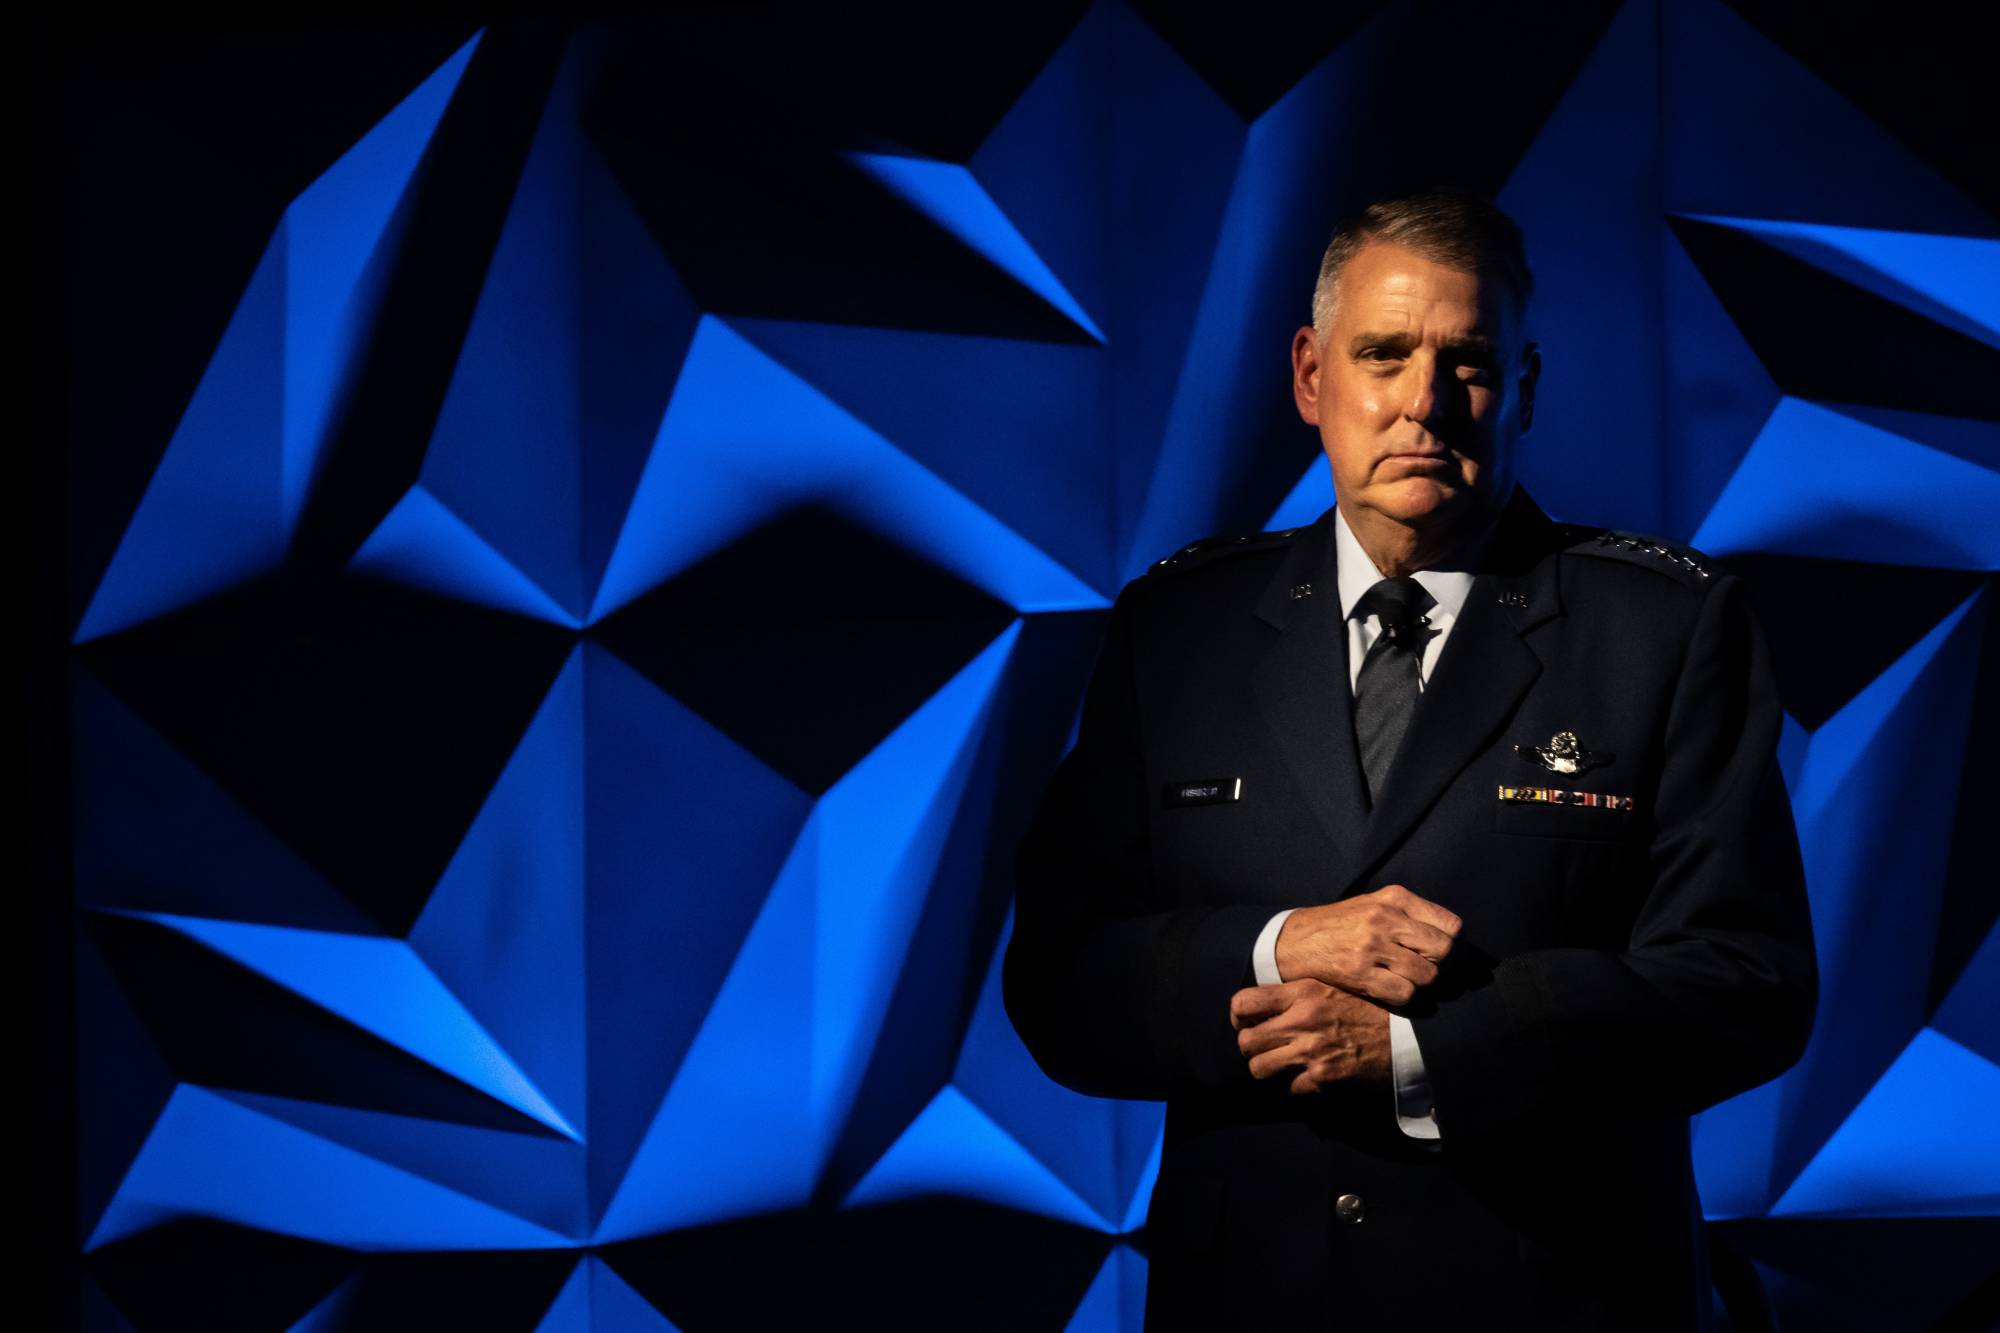 The U.S. Air Force's Air Mobility Command chief, Gen. Mike Minihan, speaks during the Airlift/Tanker Association Symposium in Denver last October. | U.S. AIR FORCE